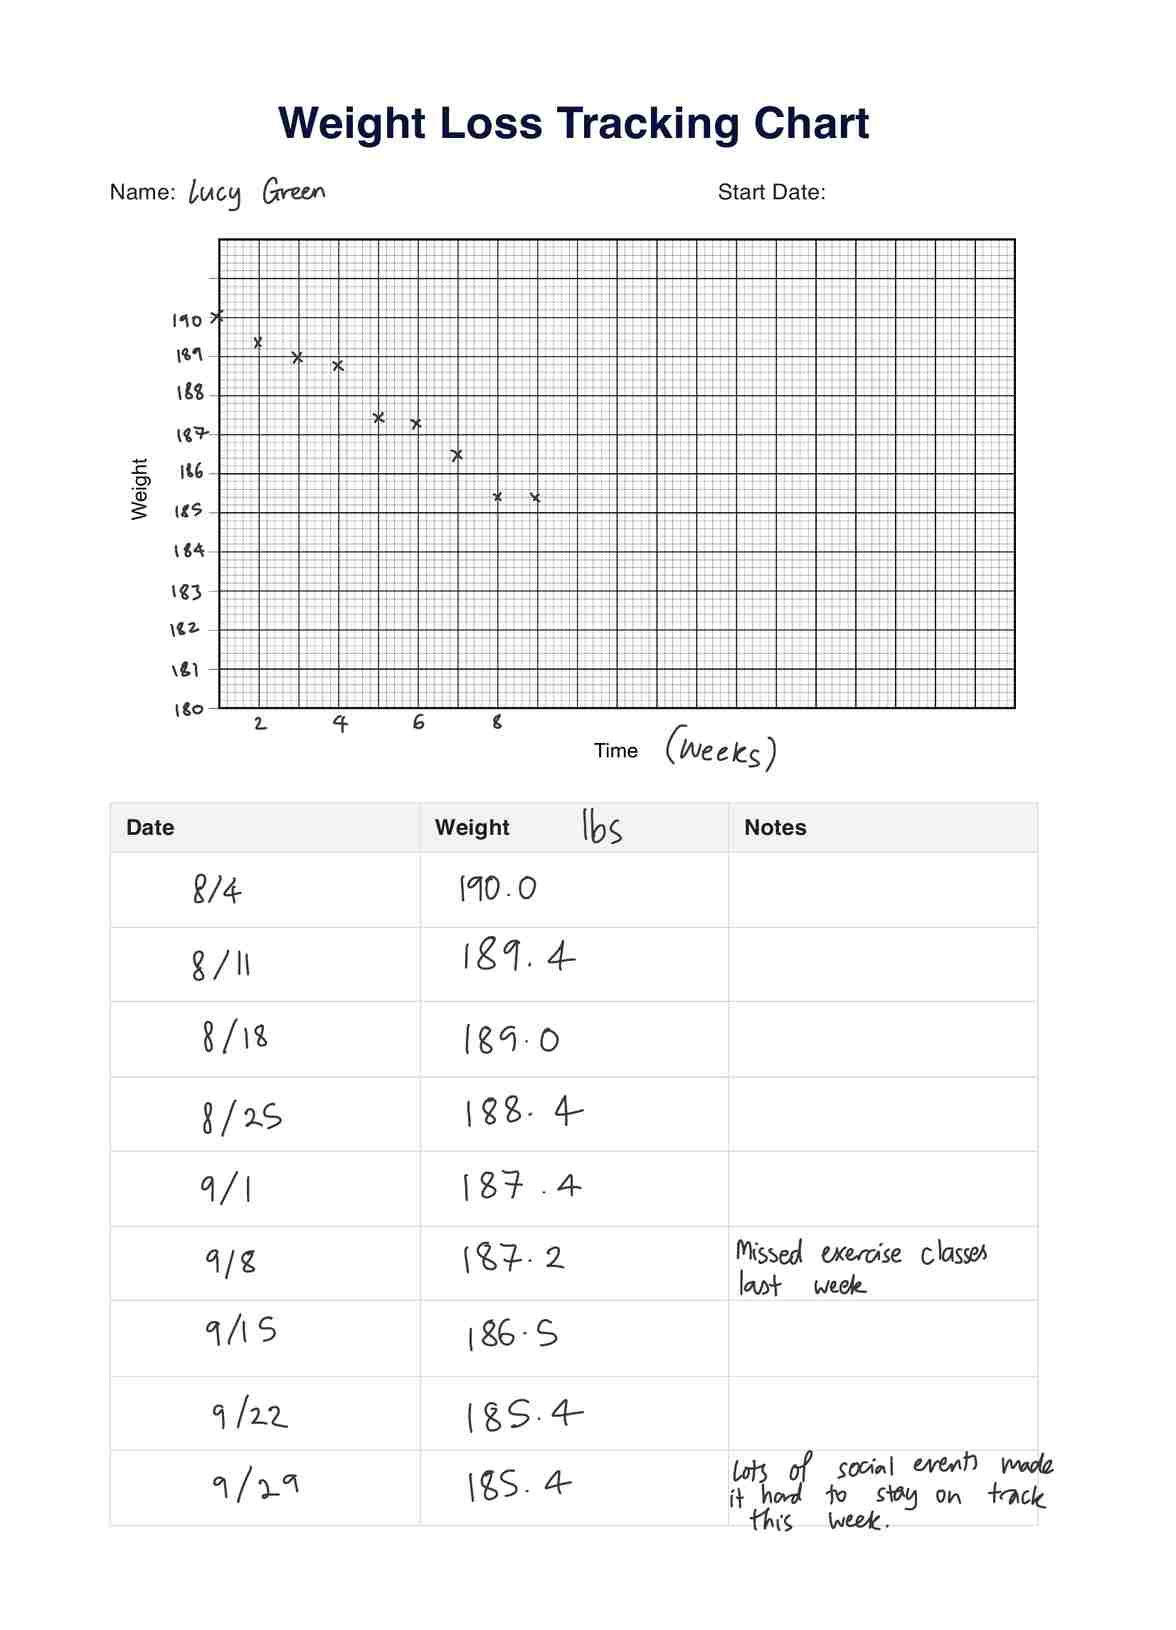 Weight Loss Tracking Chart PDF Example